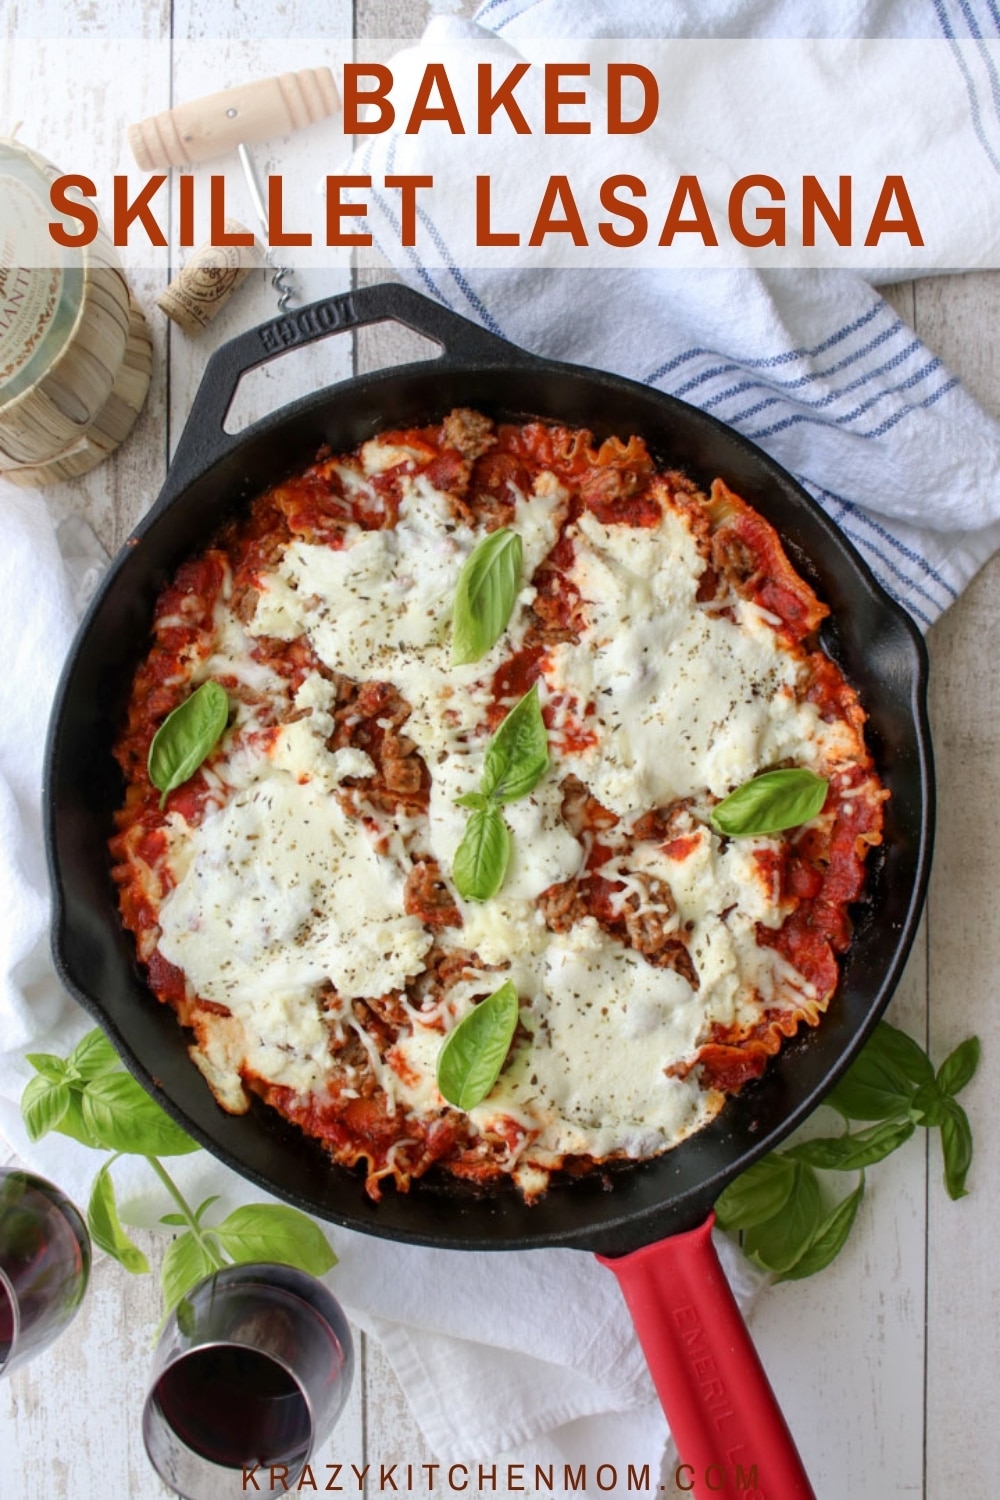 One-pan baked skillet lasagna is cheesy Italian comfort food. It's prepared in a skillet and baked to perfection. via @krazykitchenmom